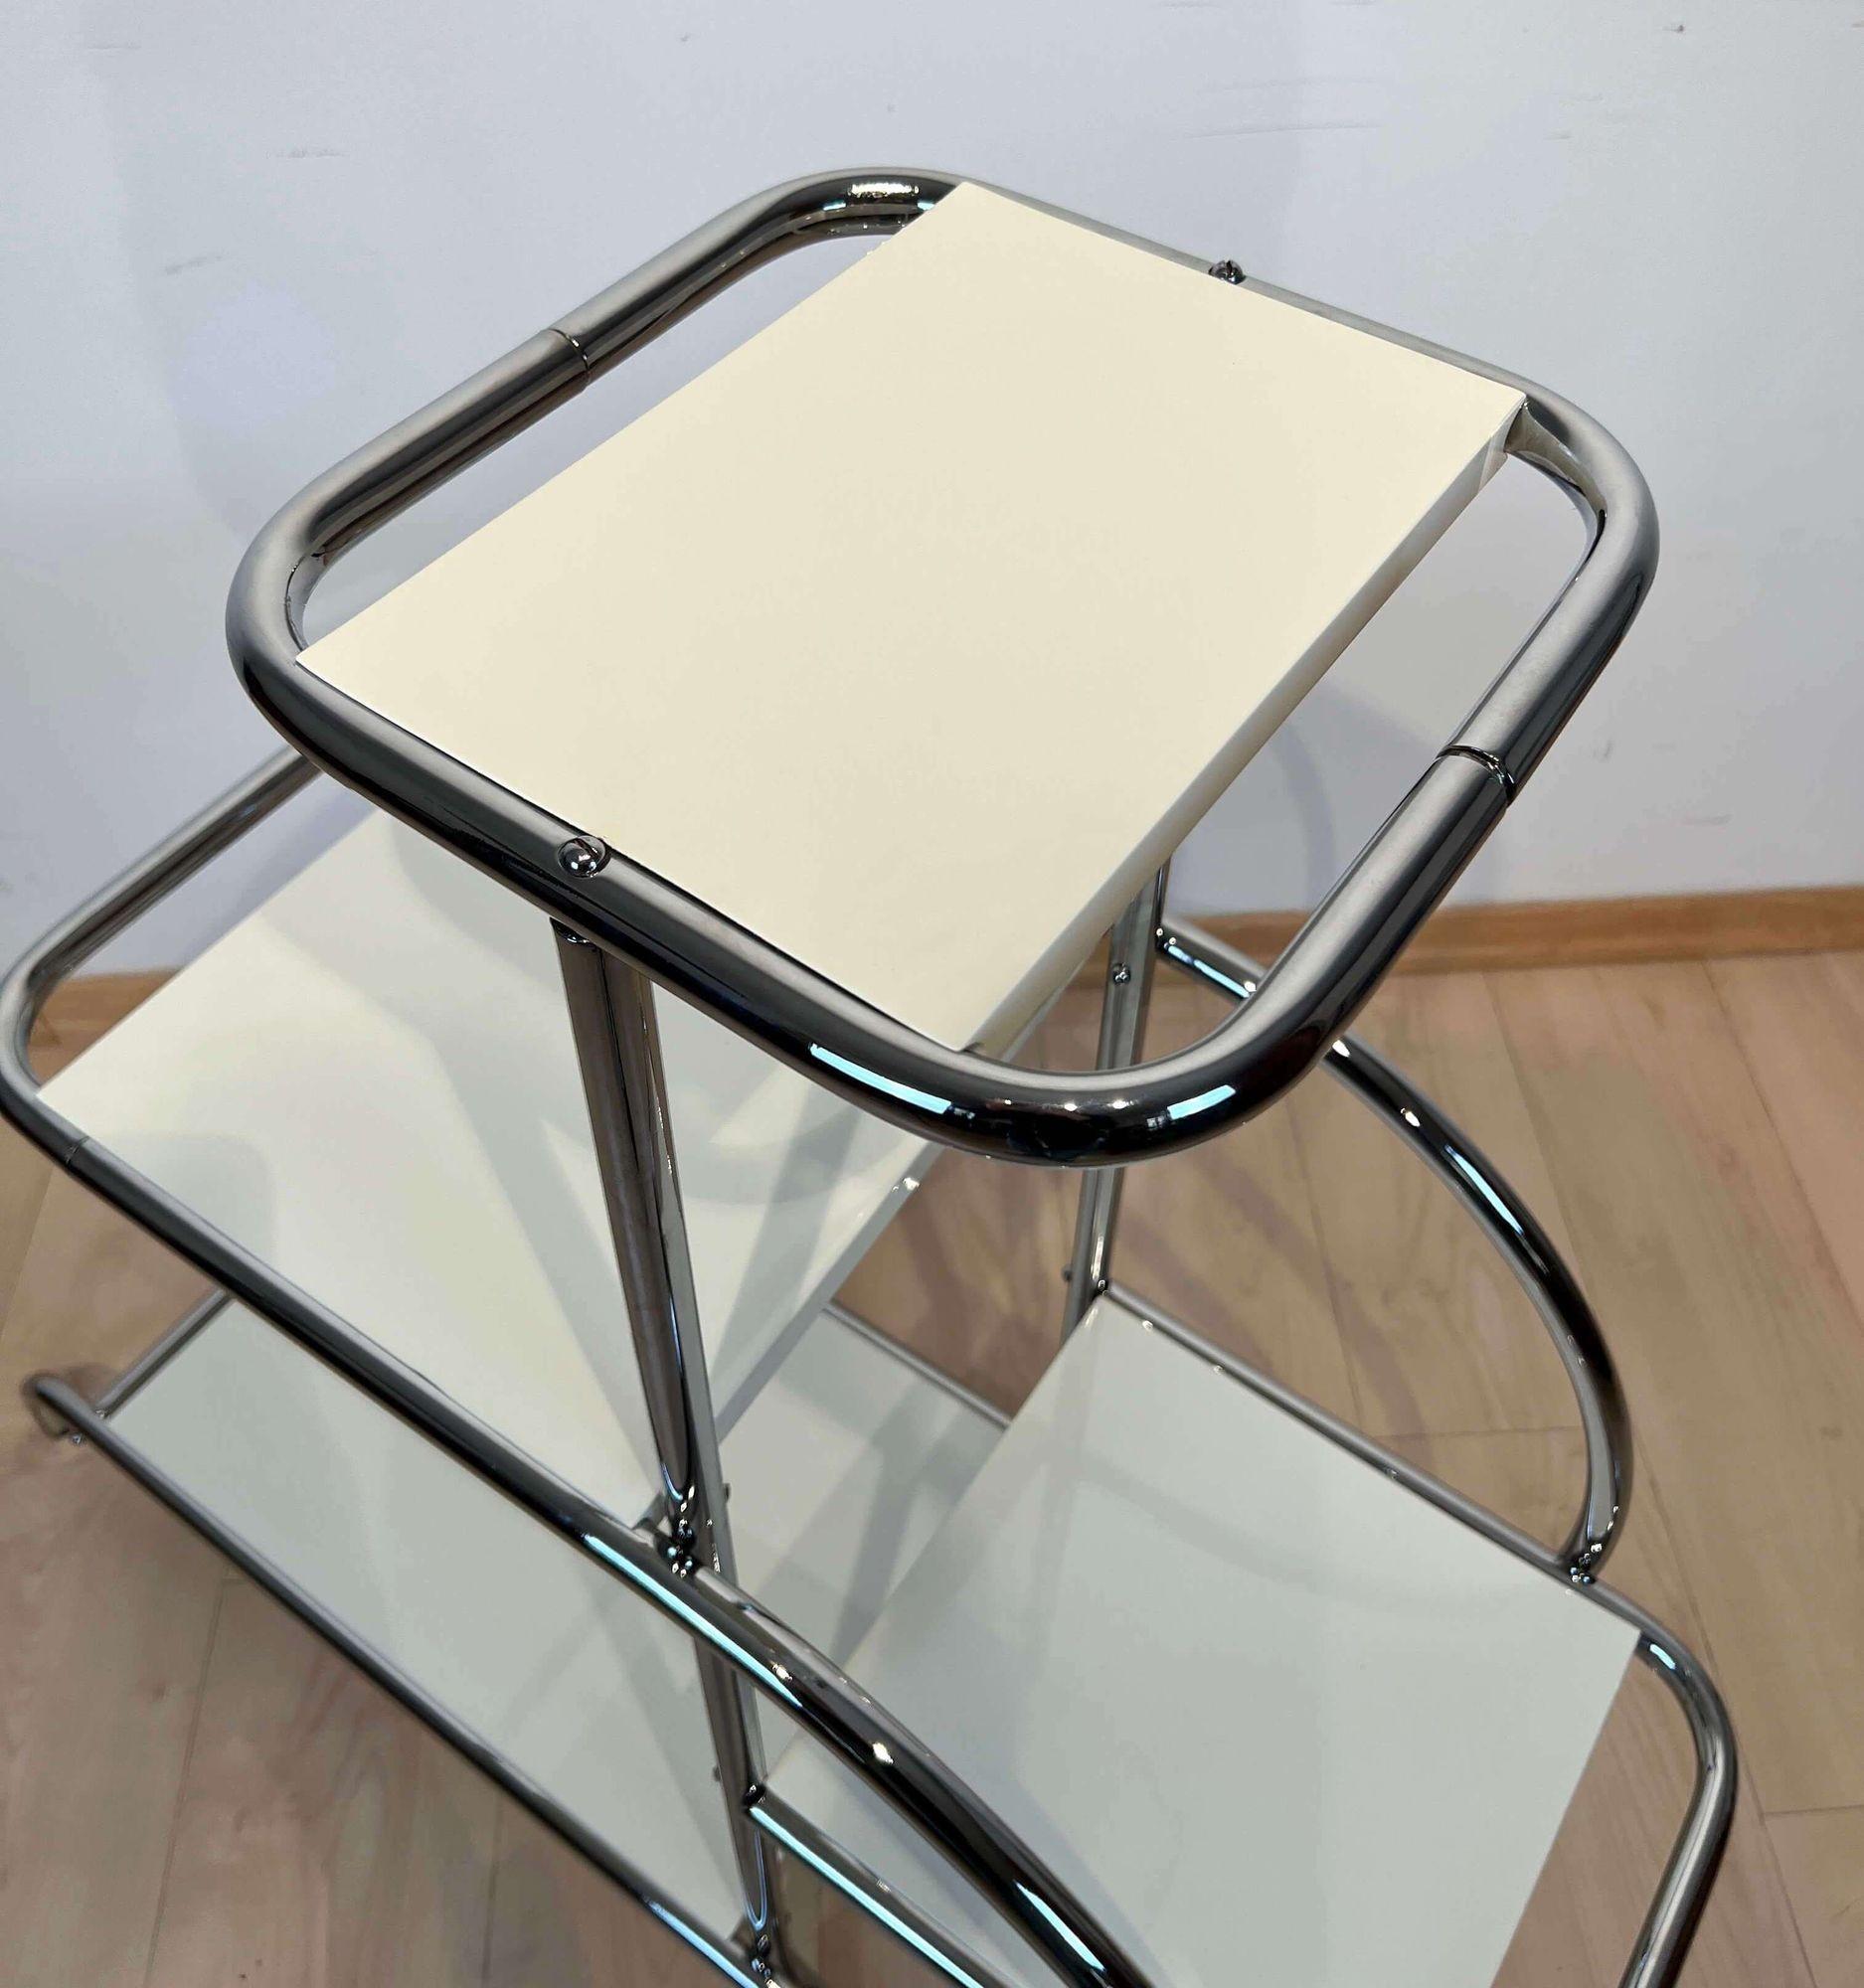 Bauhaus Steeltube Etagere, Creme-White Lacquer, Nickel Plate, Germany, 1930s For Sale 5